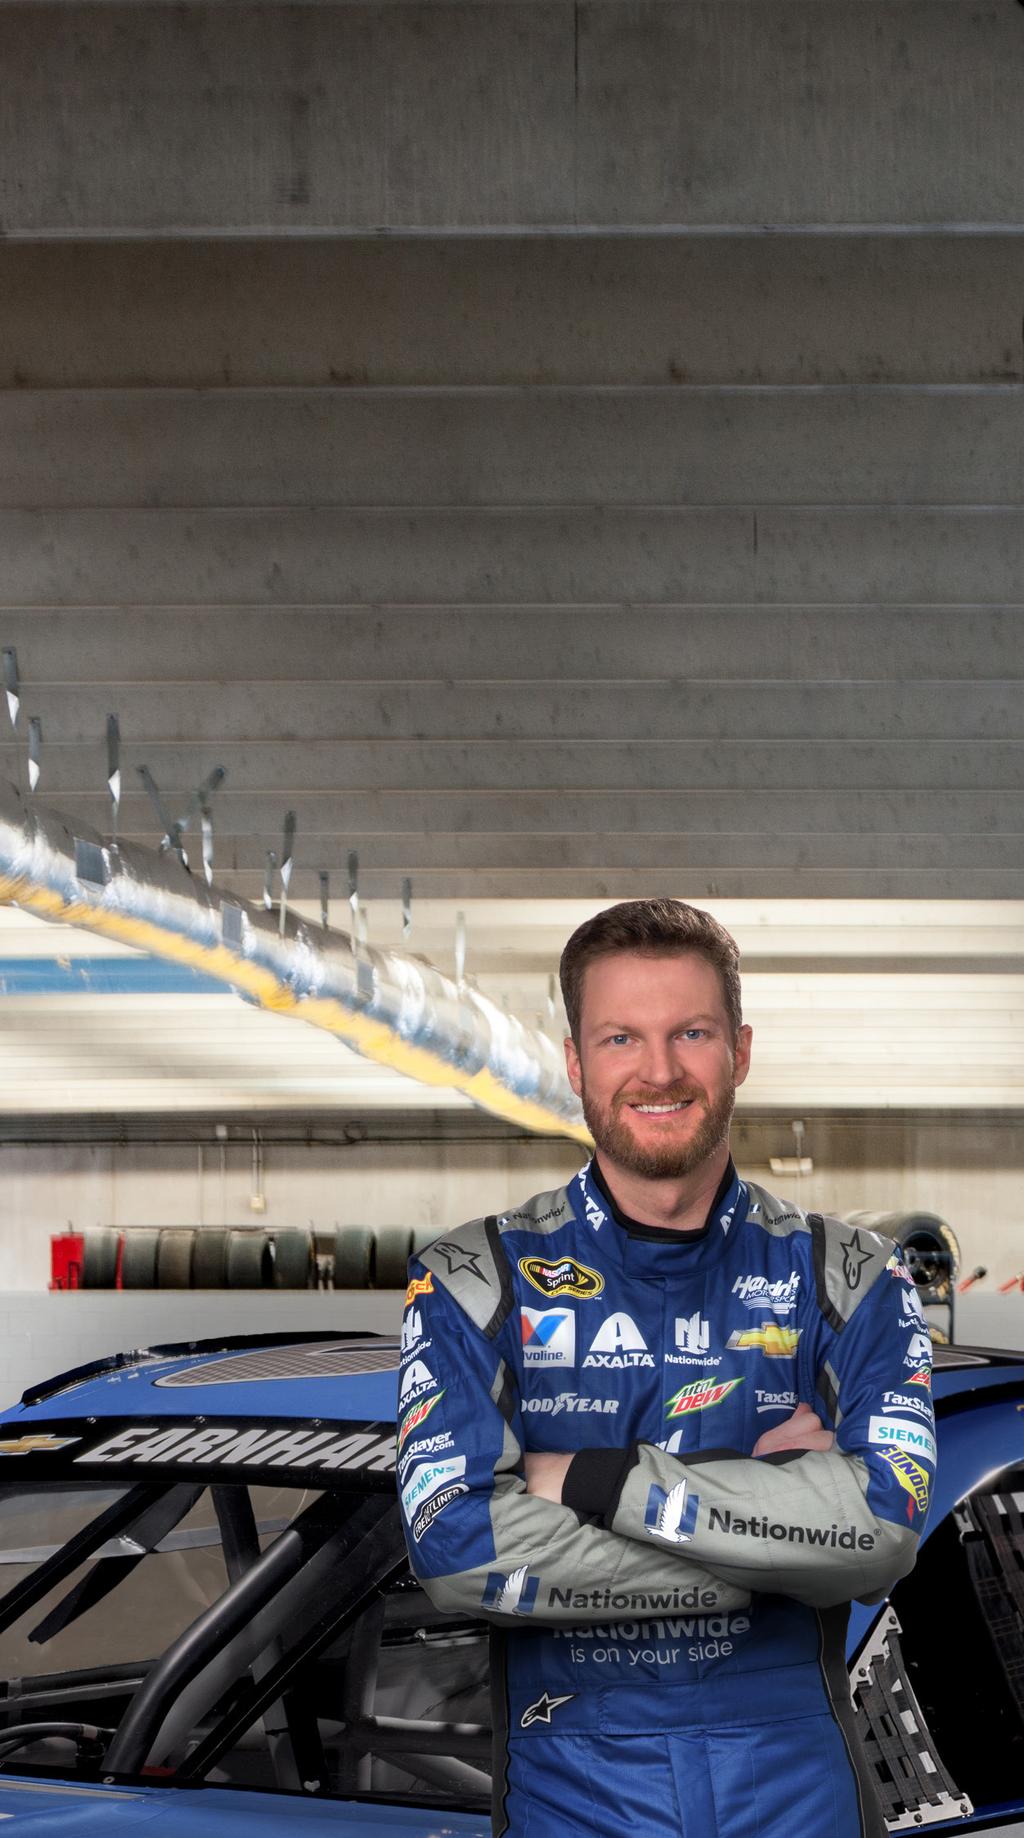 DALE EARNHARDT JR. AND NATIONWIDE A PARTNERSHIP ON THE FAST TRACK Dale Earnhardt Jr.